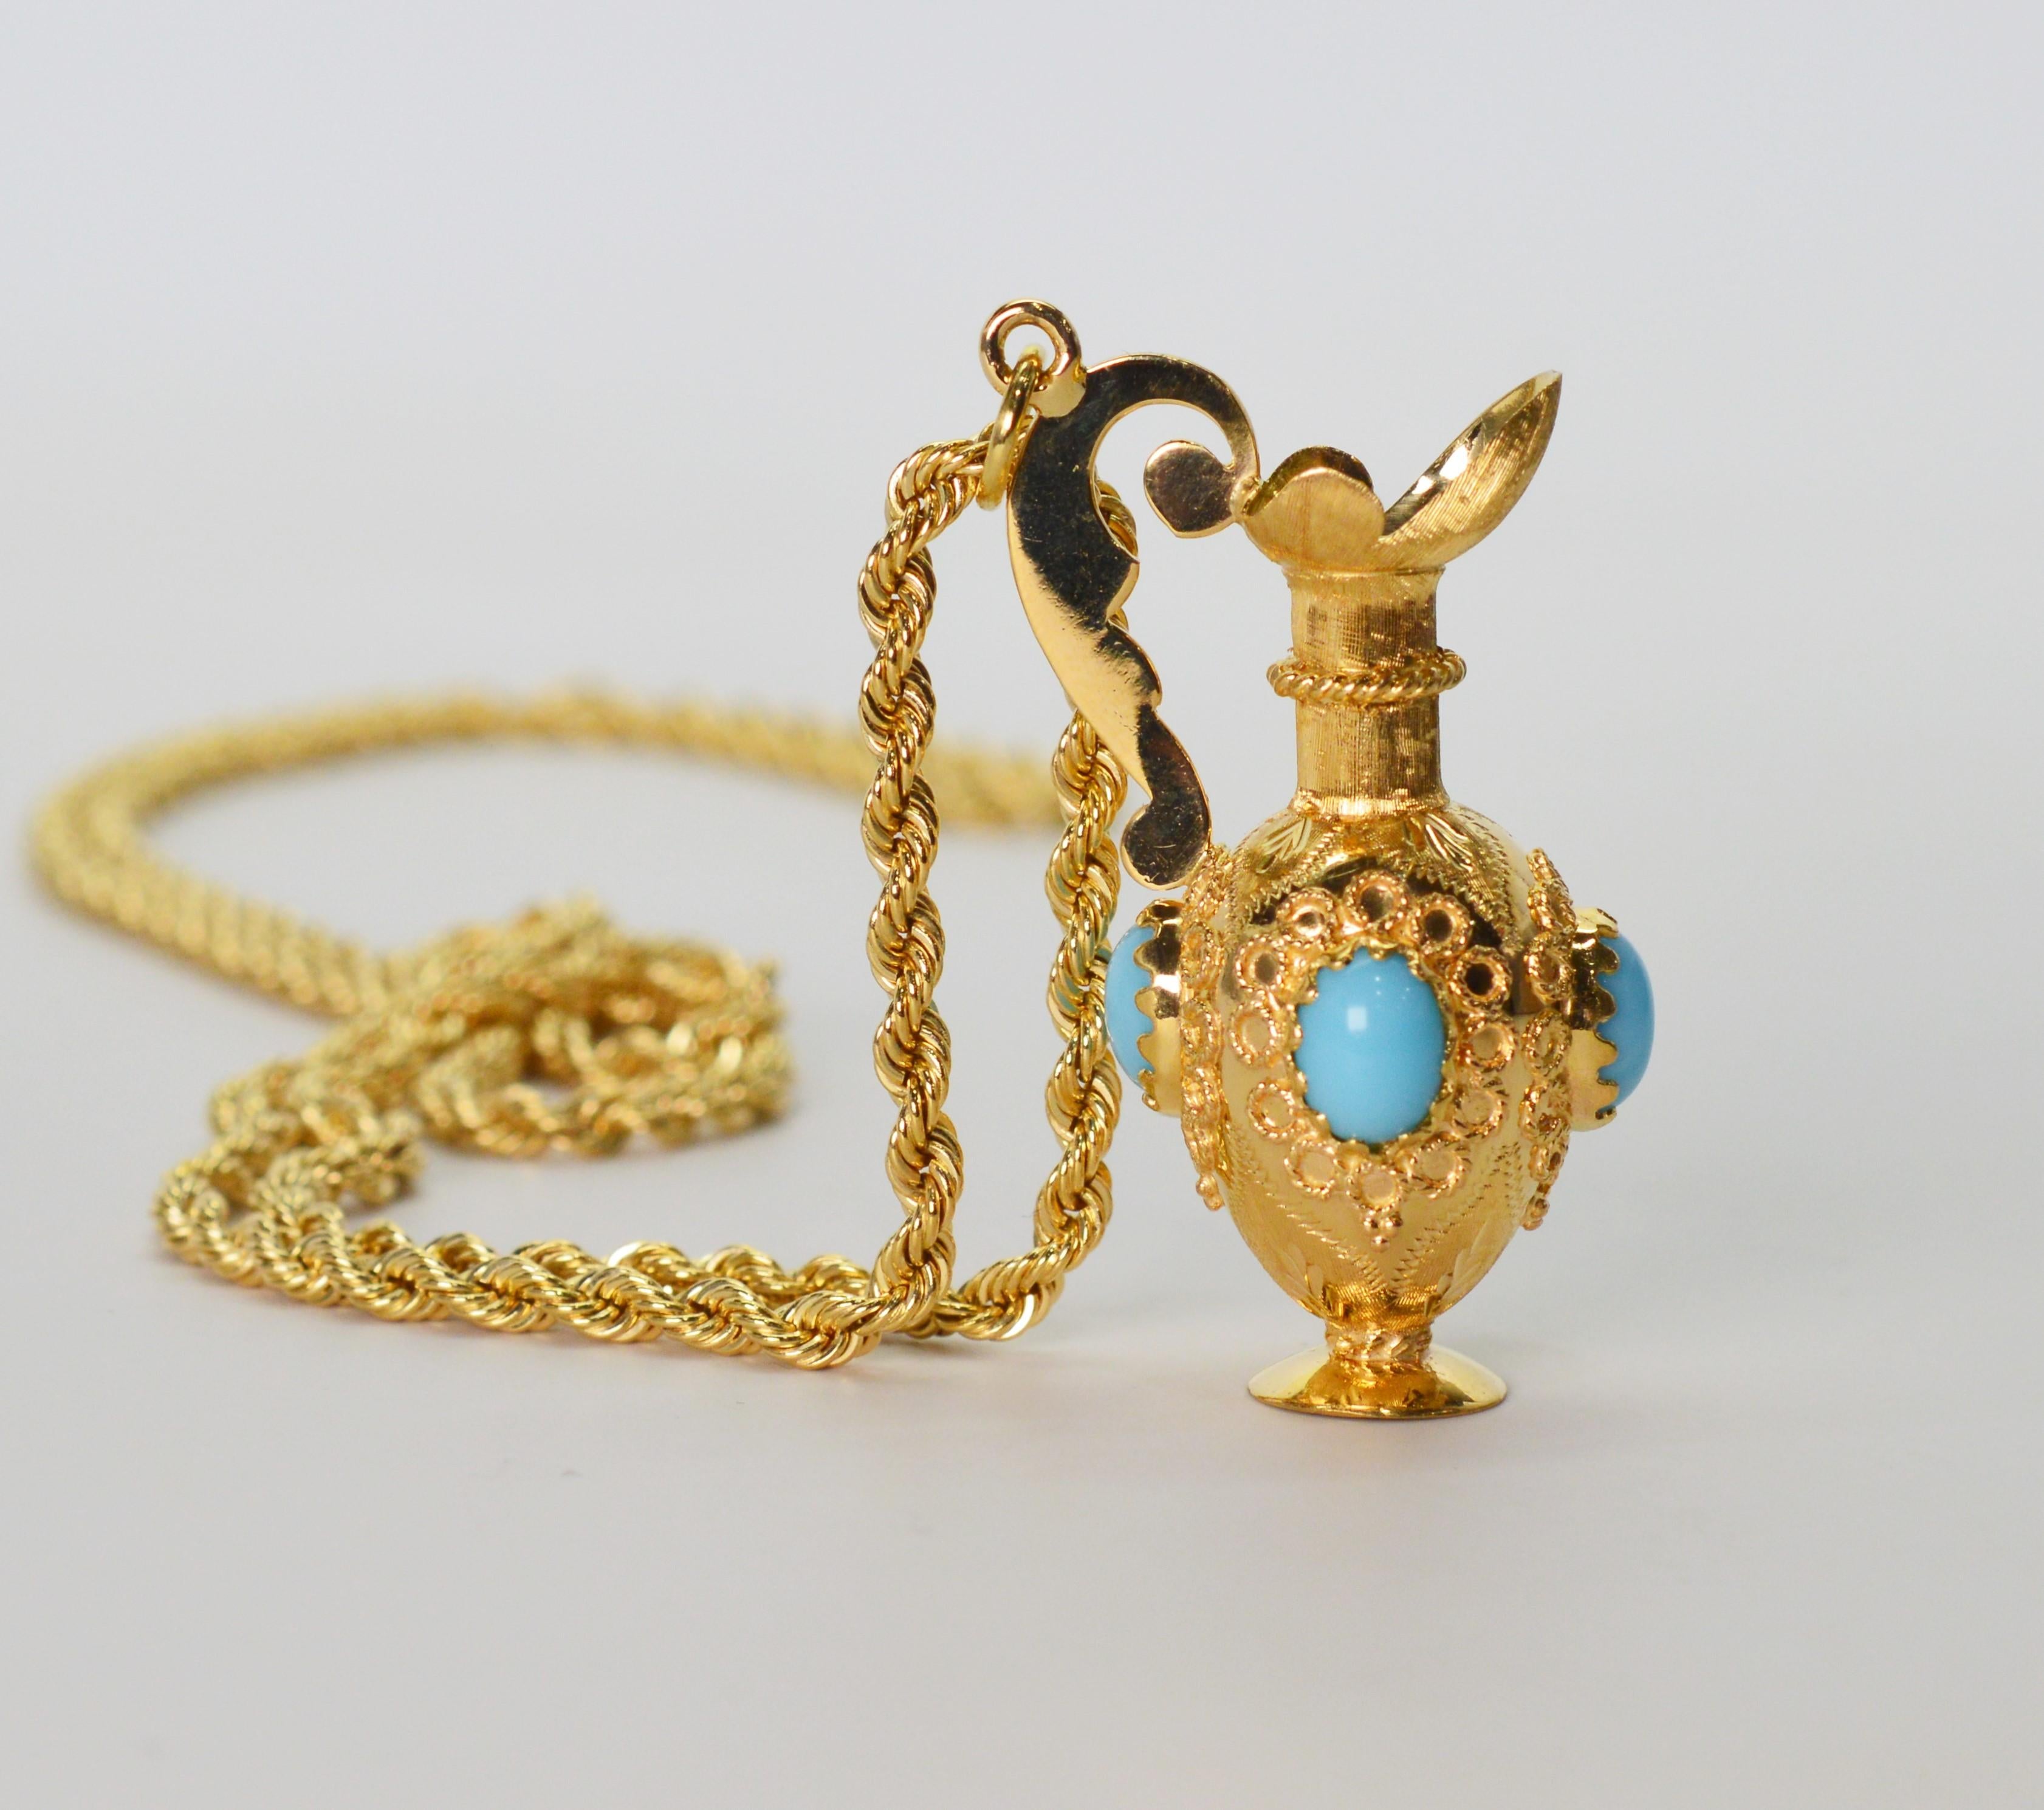 18K Vessel Charm Pendant w Turquoise Cabochon Accents 14K Yellow Gold Necklace For Sale 2